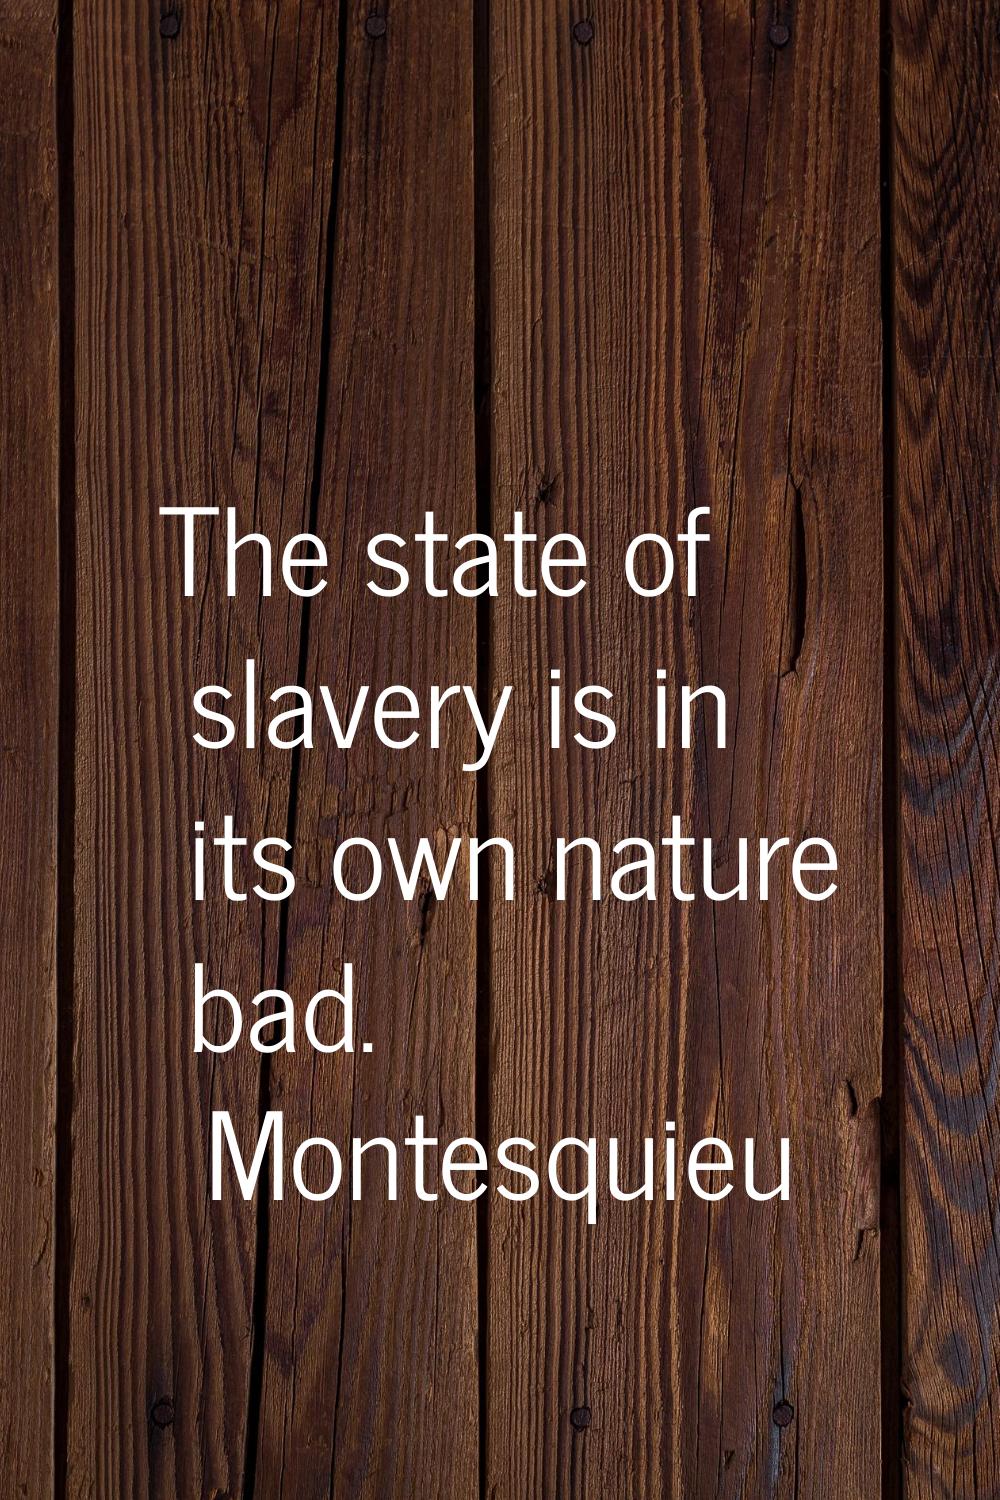 The state of slavery is in its own nature bad.